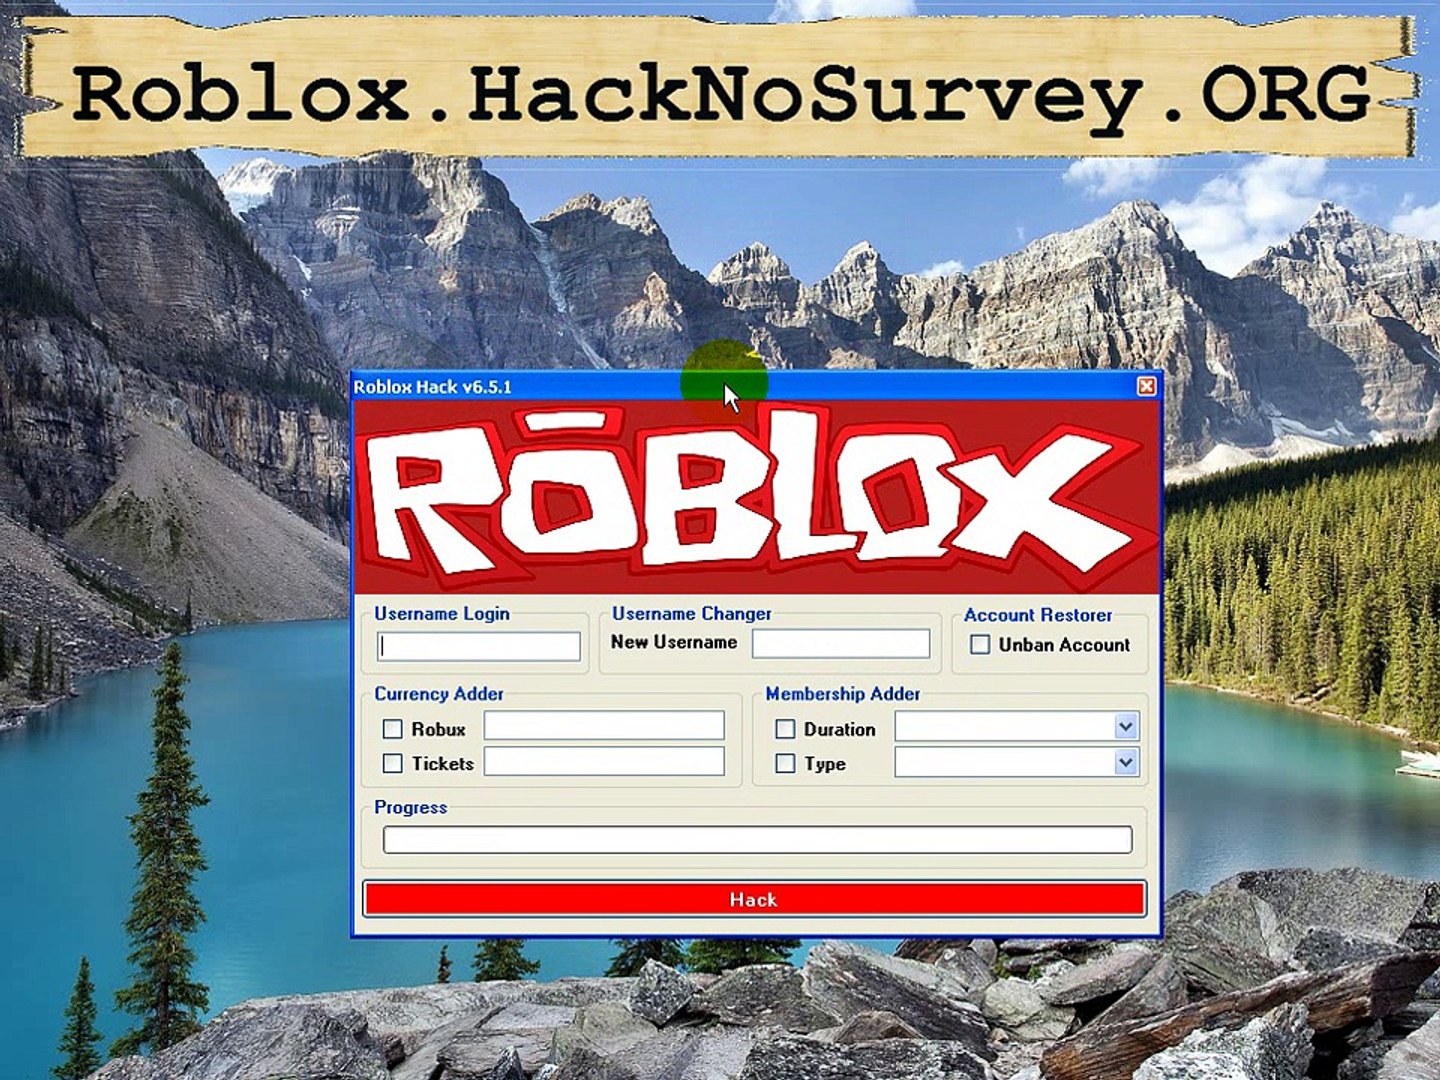 Roblox Cheats Engine Final 2015 For Unlimited Robux Or Tix No Survey 2015 Video Dailymotion - cheat engine for roblox unlimited robux